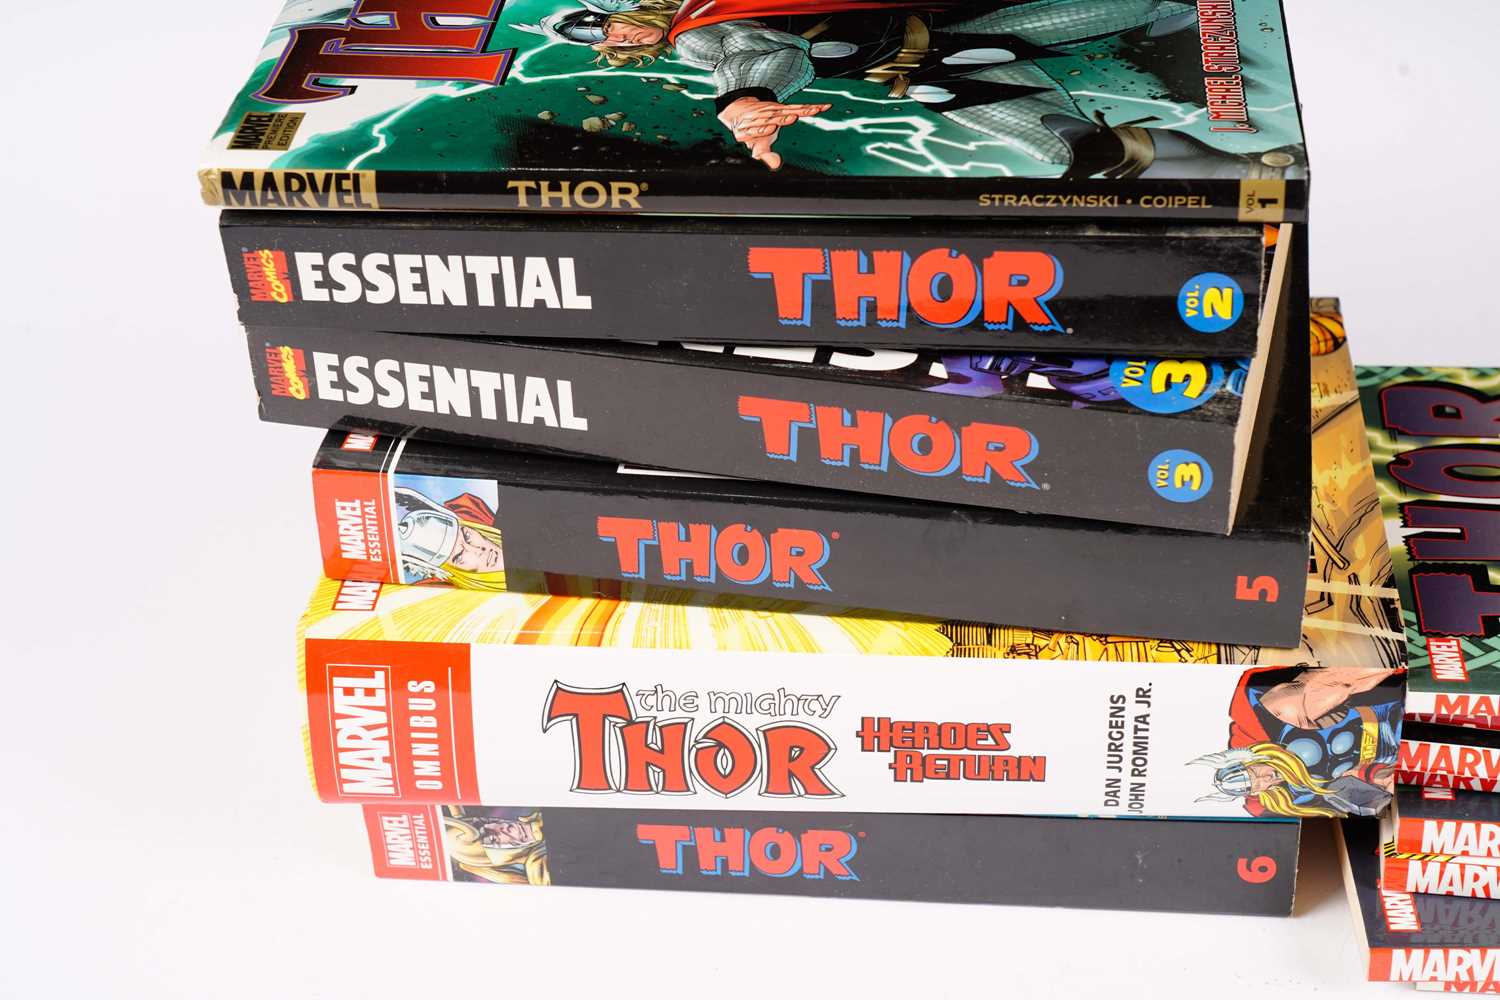 Thor by Marvel Comics - Image 3 of 3